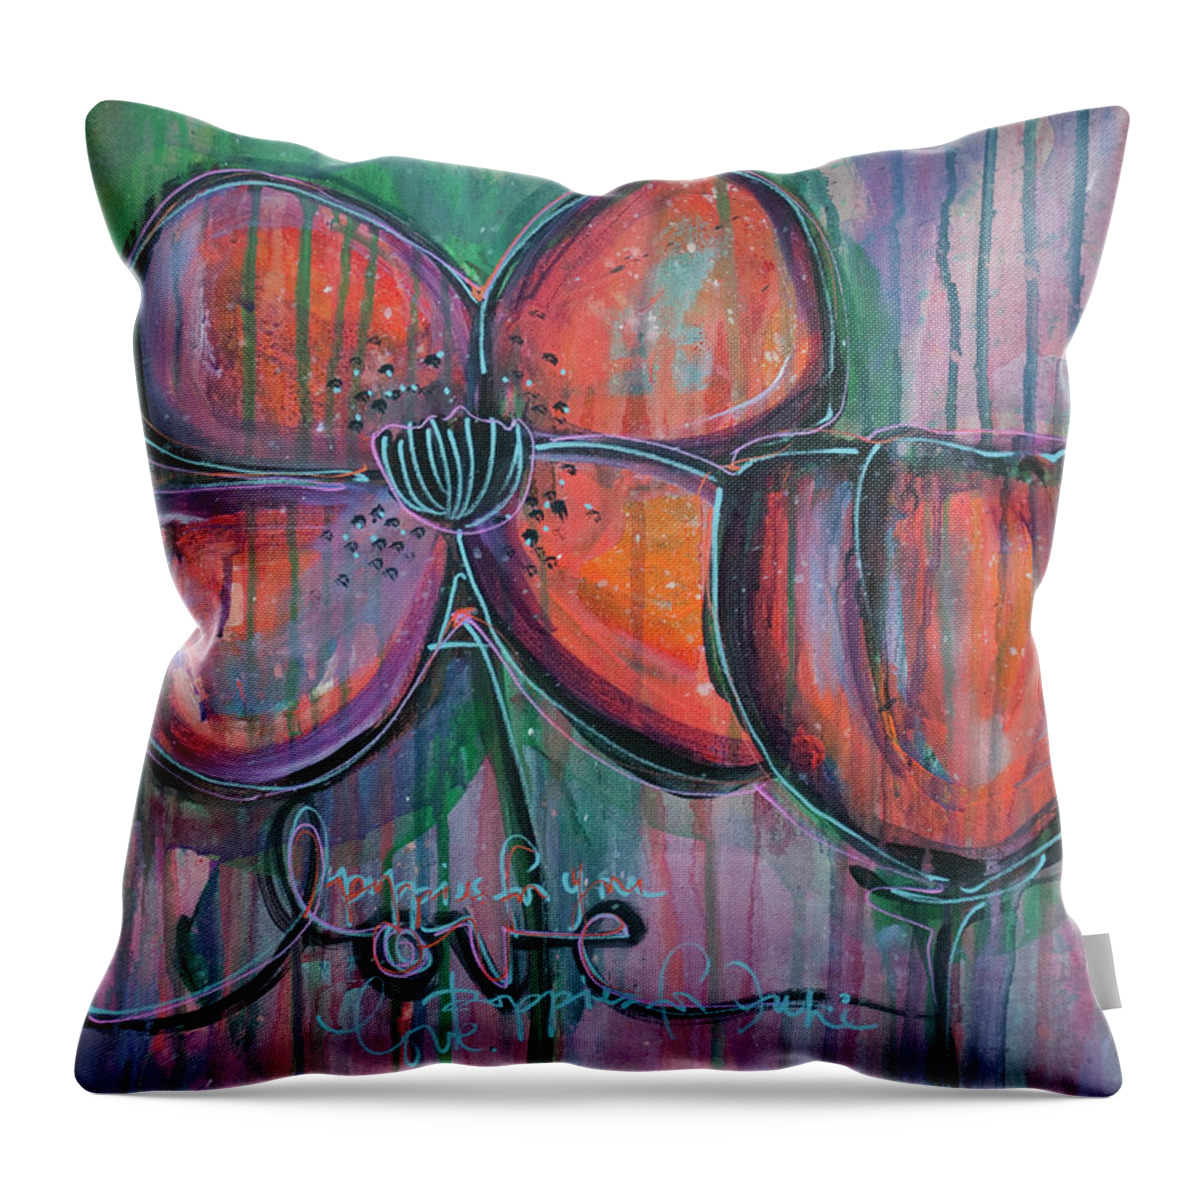 Poppies Throw Pillow featuring the painting Poppies For June No.2 by Laurie Maves ART